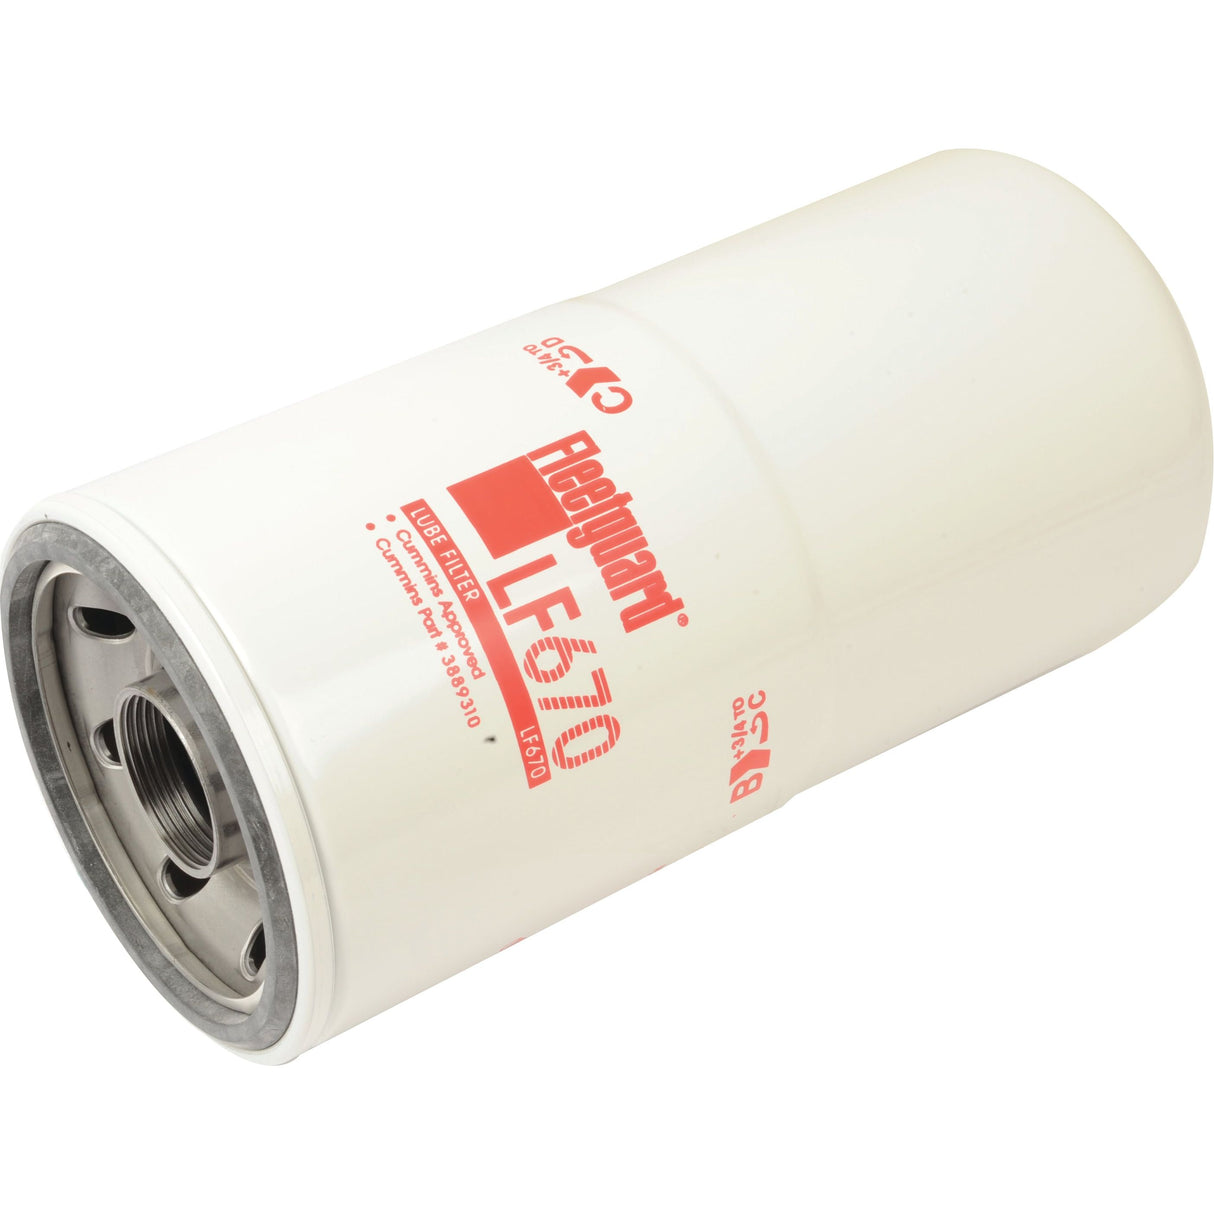 Oil Filter - Spin On - LF670
 - S.76632 - Farming Parts